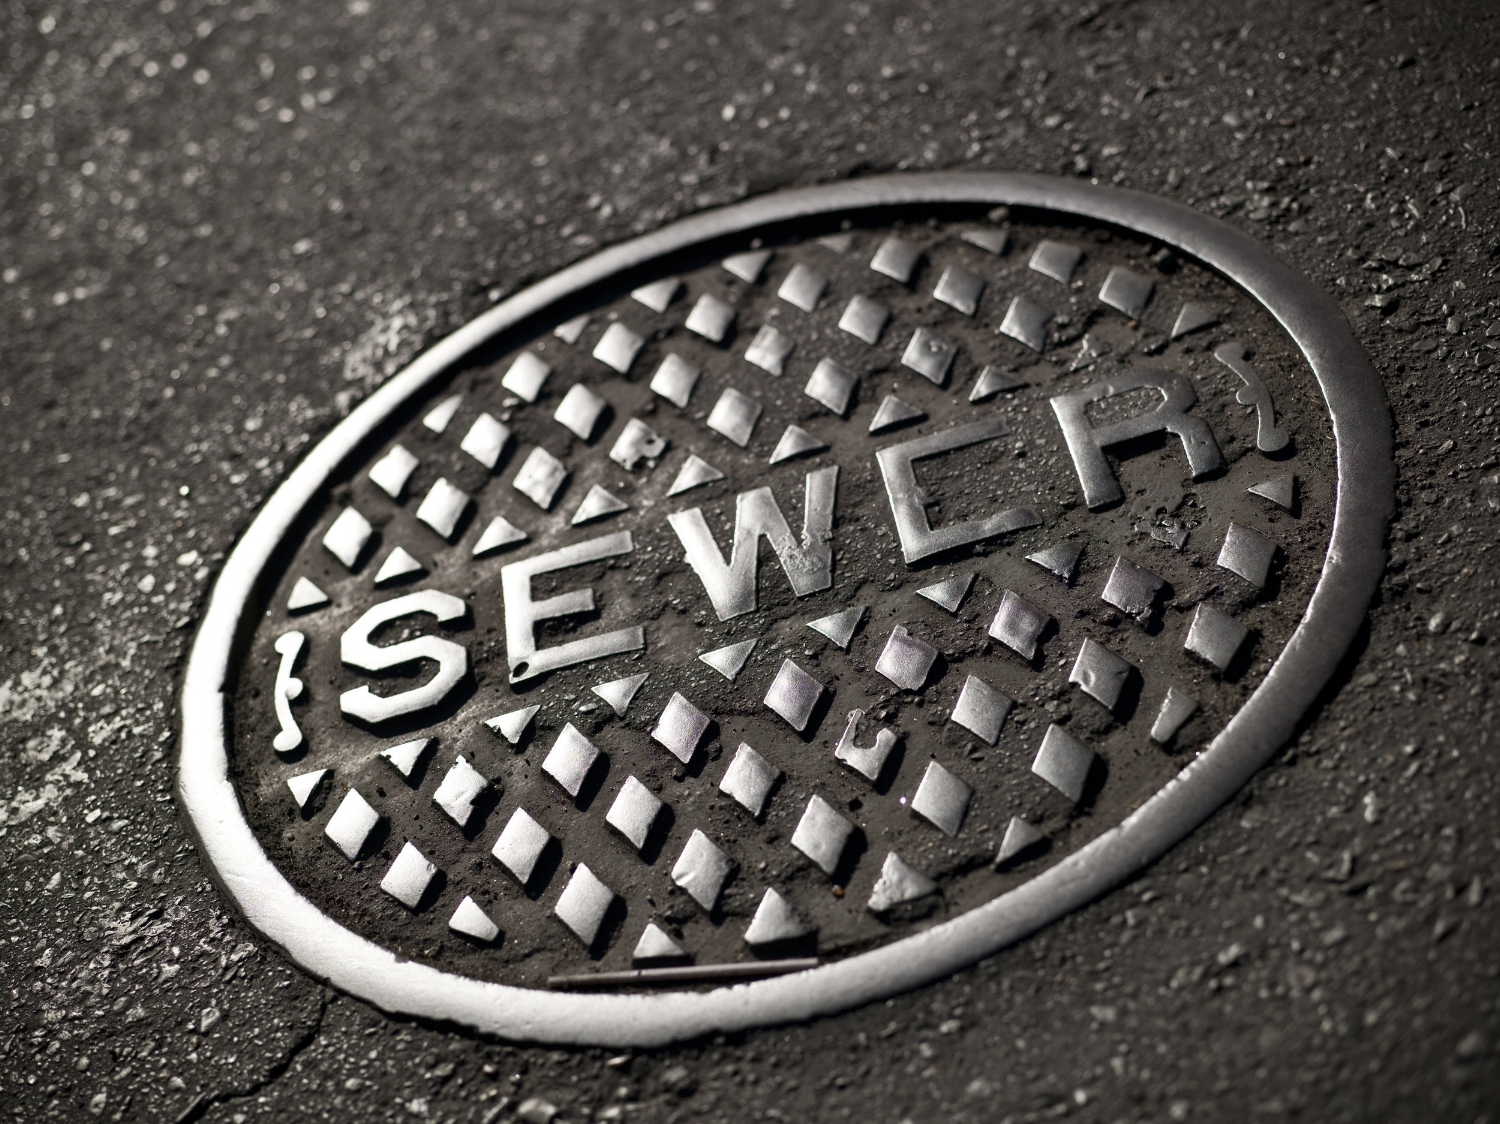   Sewer Flow Study   Comprehensive Capacity Analysis Report   Get a Quote  